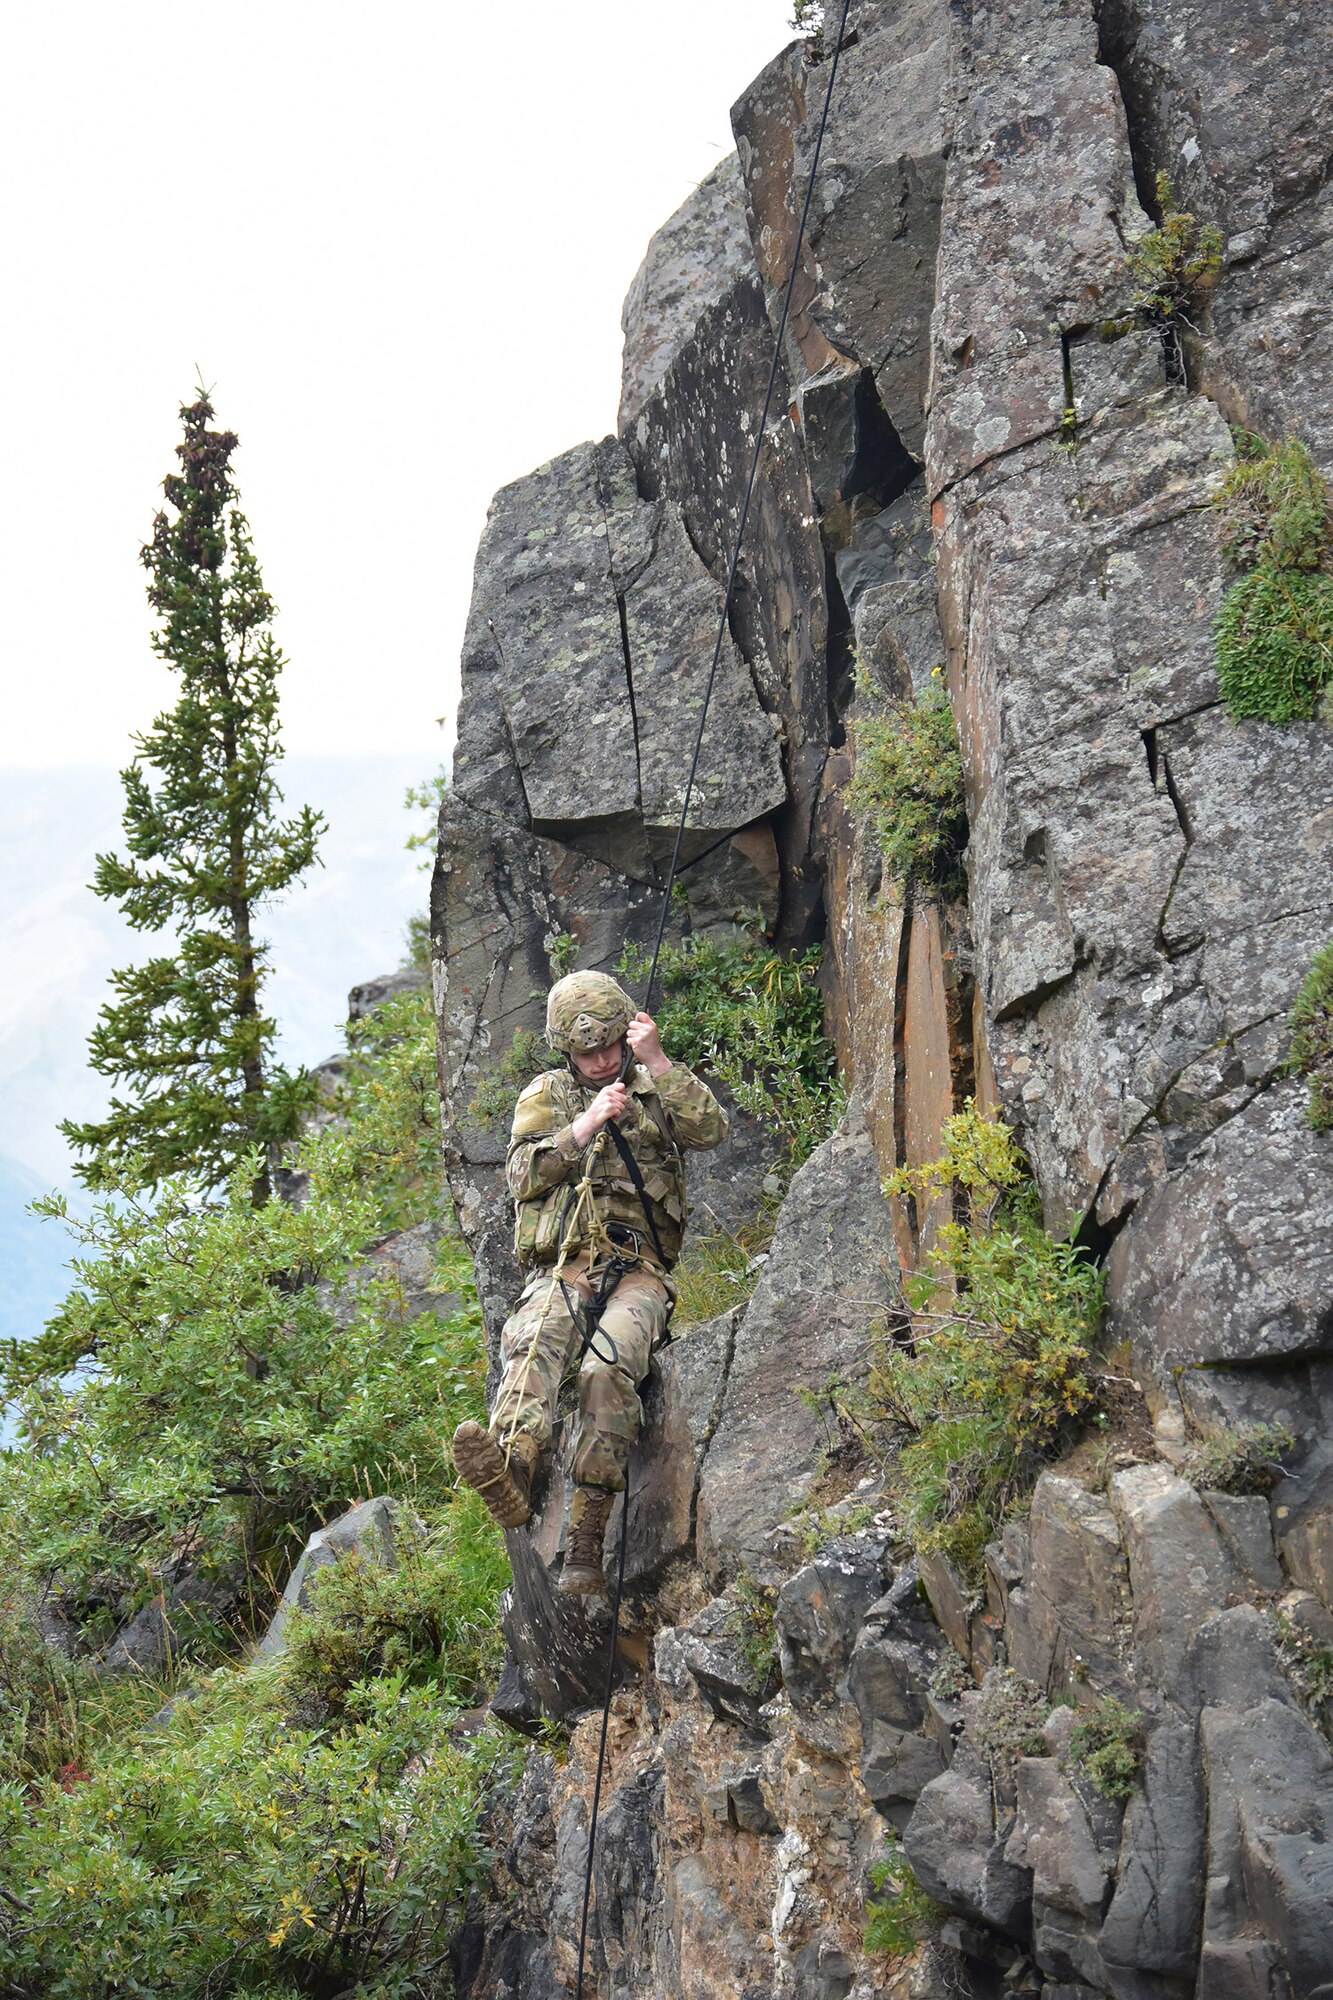 Spc. Michael John McConville uses a Prusik friction hitch to haul himself up a rock face at the Northern Warfare Training Center’s Black Rapids Site during training. NWTC cadre followed Coronavirus restrictions while guiding students through both the basic and advanced mountaineering courses in August. With the advent of Alaska’s long, cold winter, NWTC’s focus is now shifting to cold weather training for the 2020-21 season.